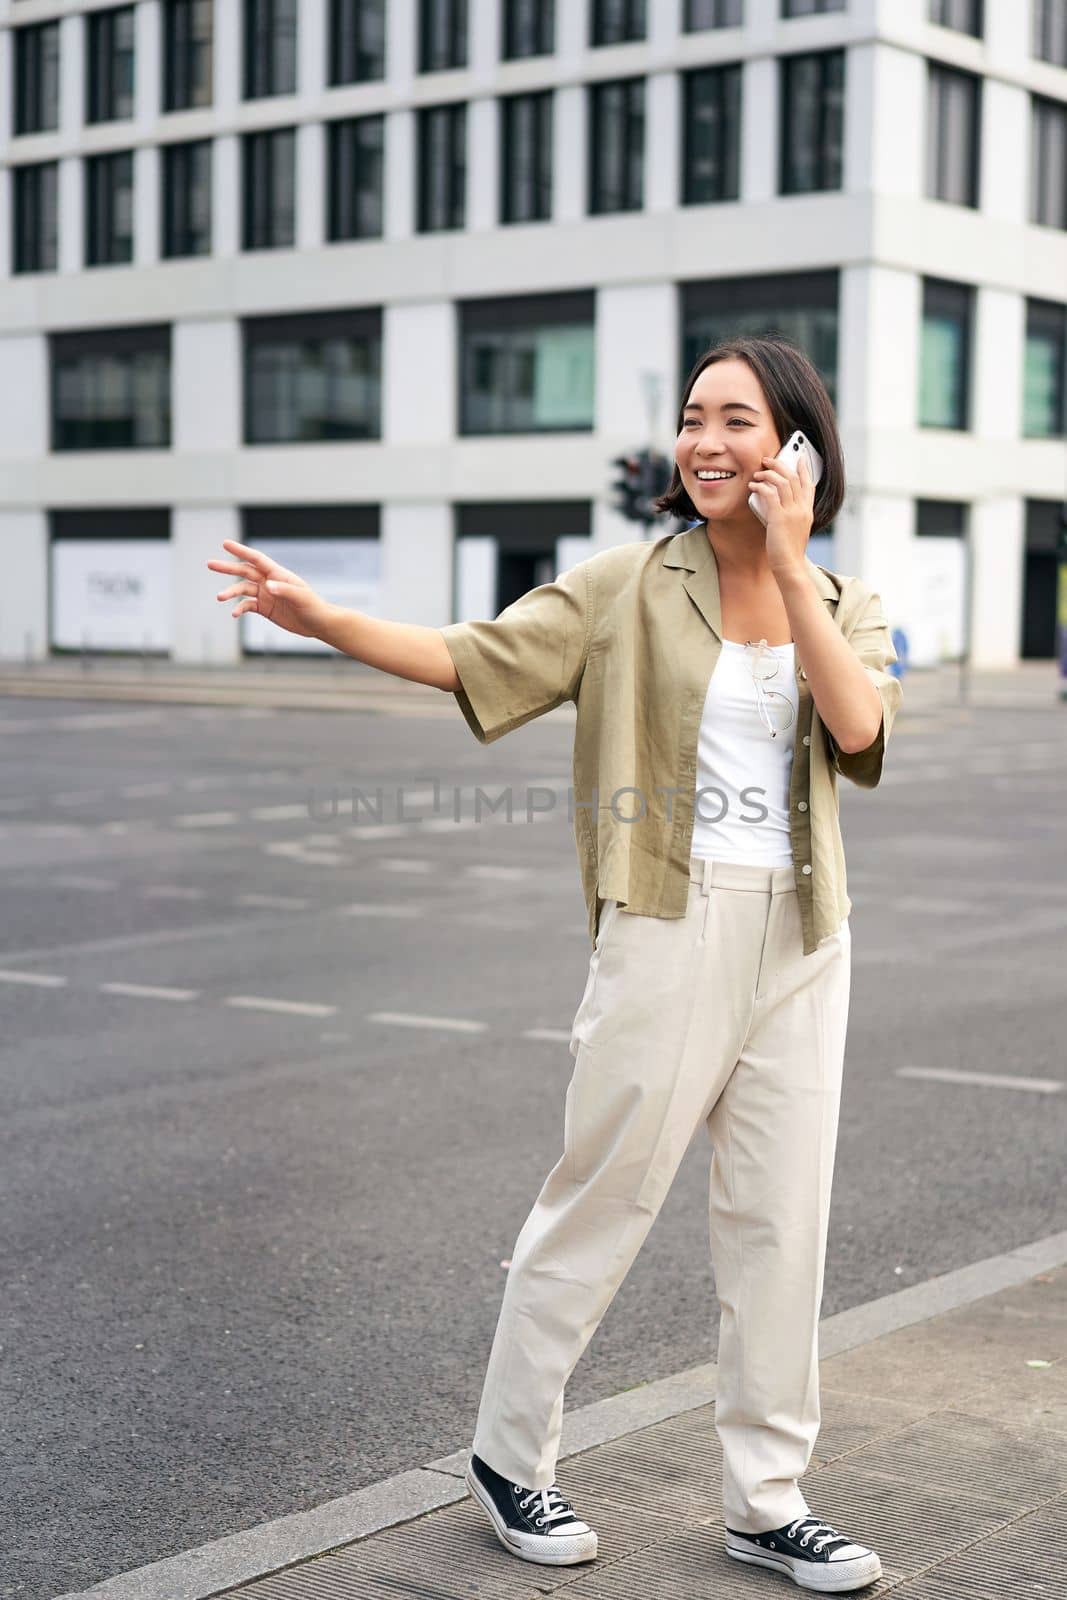 Young woman waving to taxi driver, calling or talking on mobile phone, order car ride, standing outdoors on street.